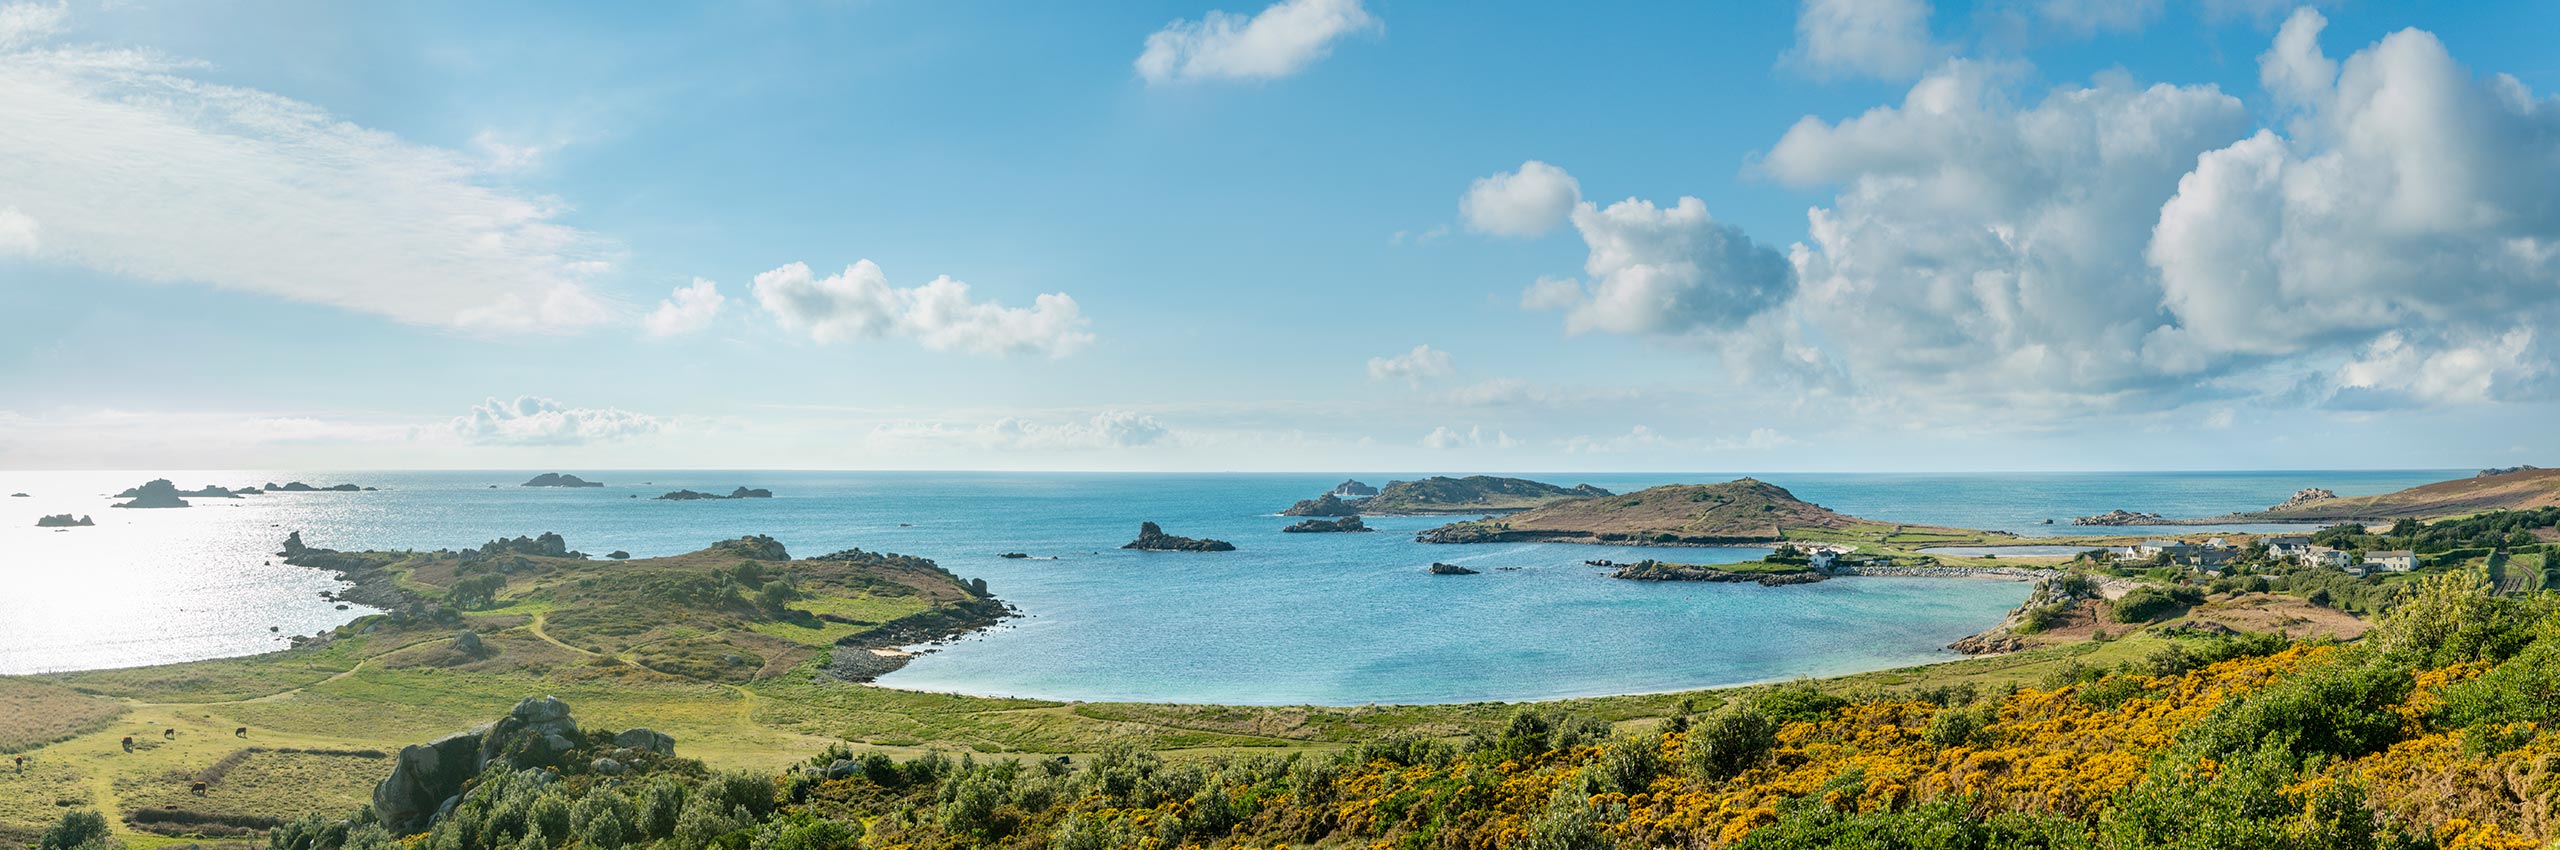 FCR-1020486 | United Kingdom/England, Cornwall, Isles of Scilly | © Justin Foulkes/4Corners